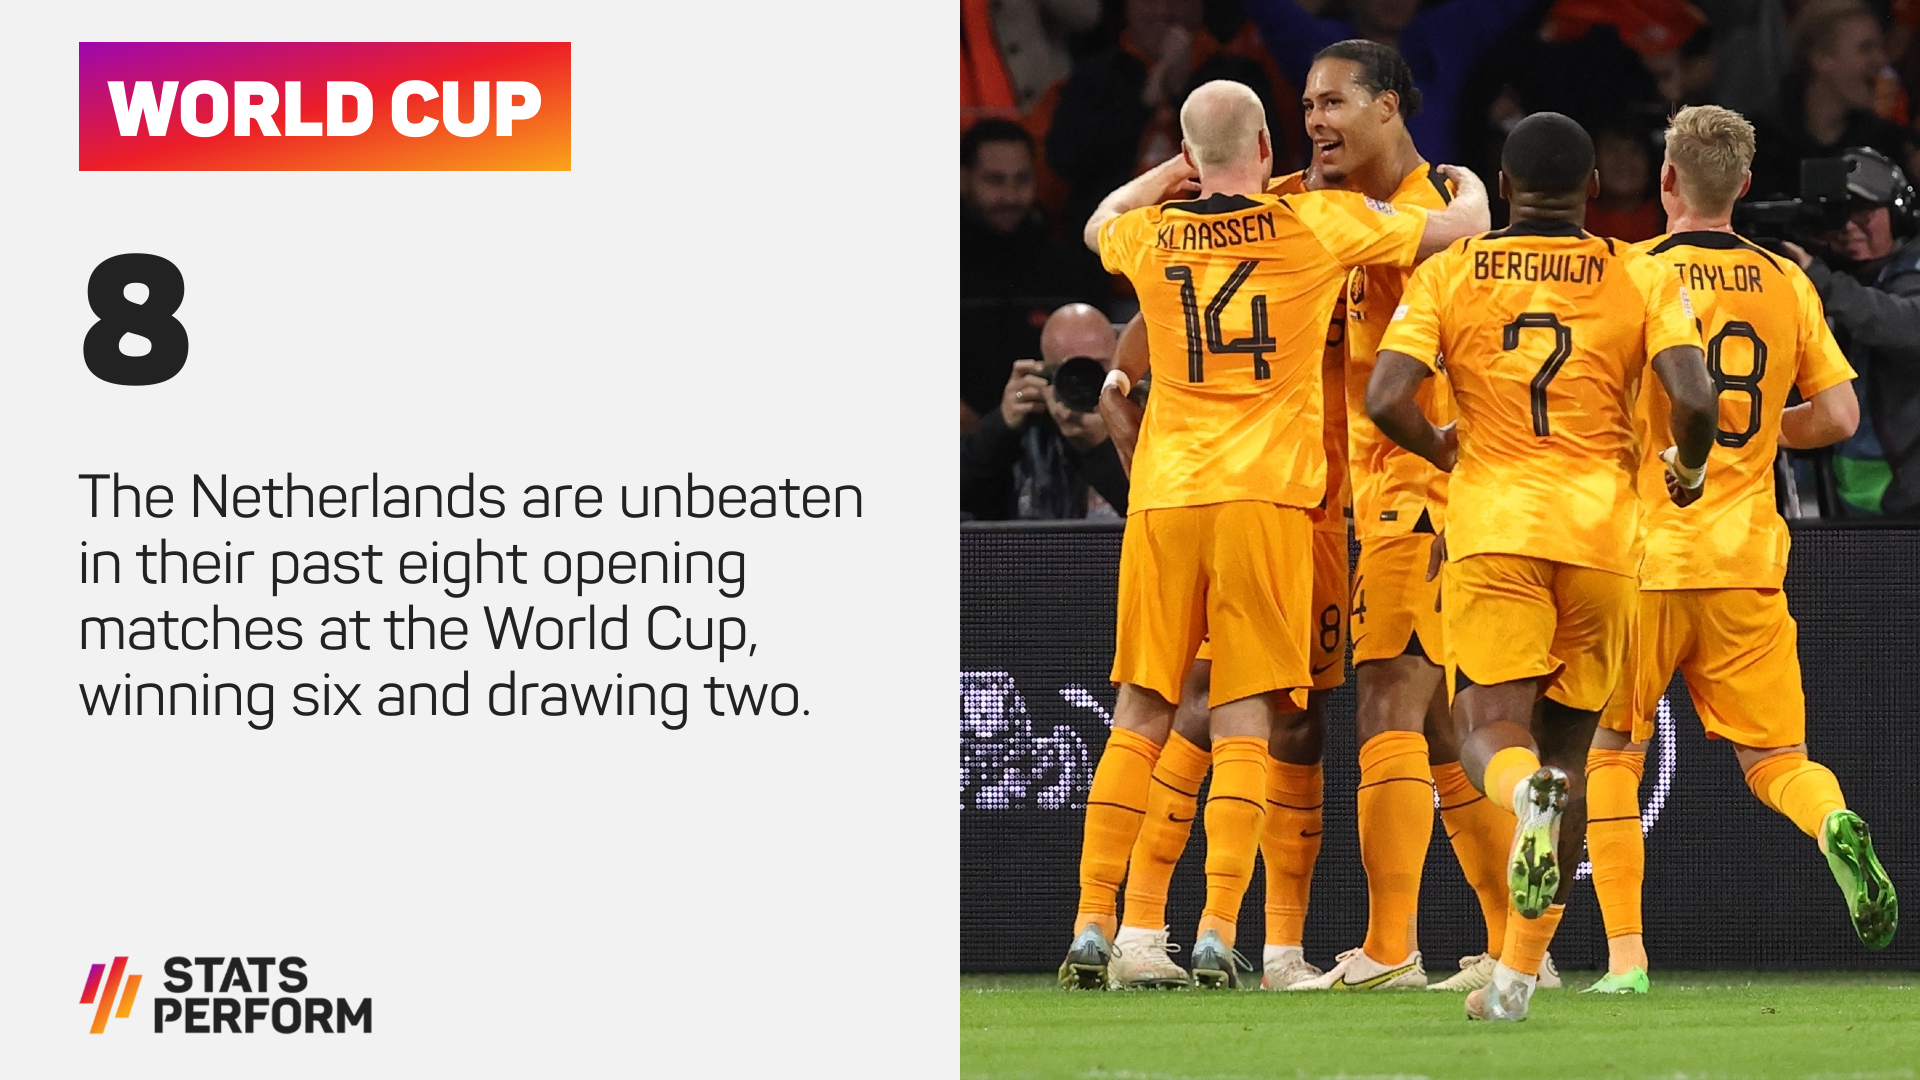 The Netherlands are unbeaten in their past eight World Cup openers